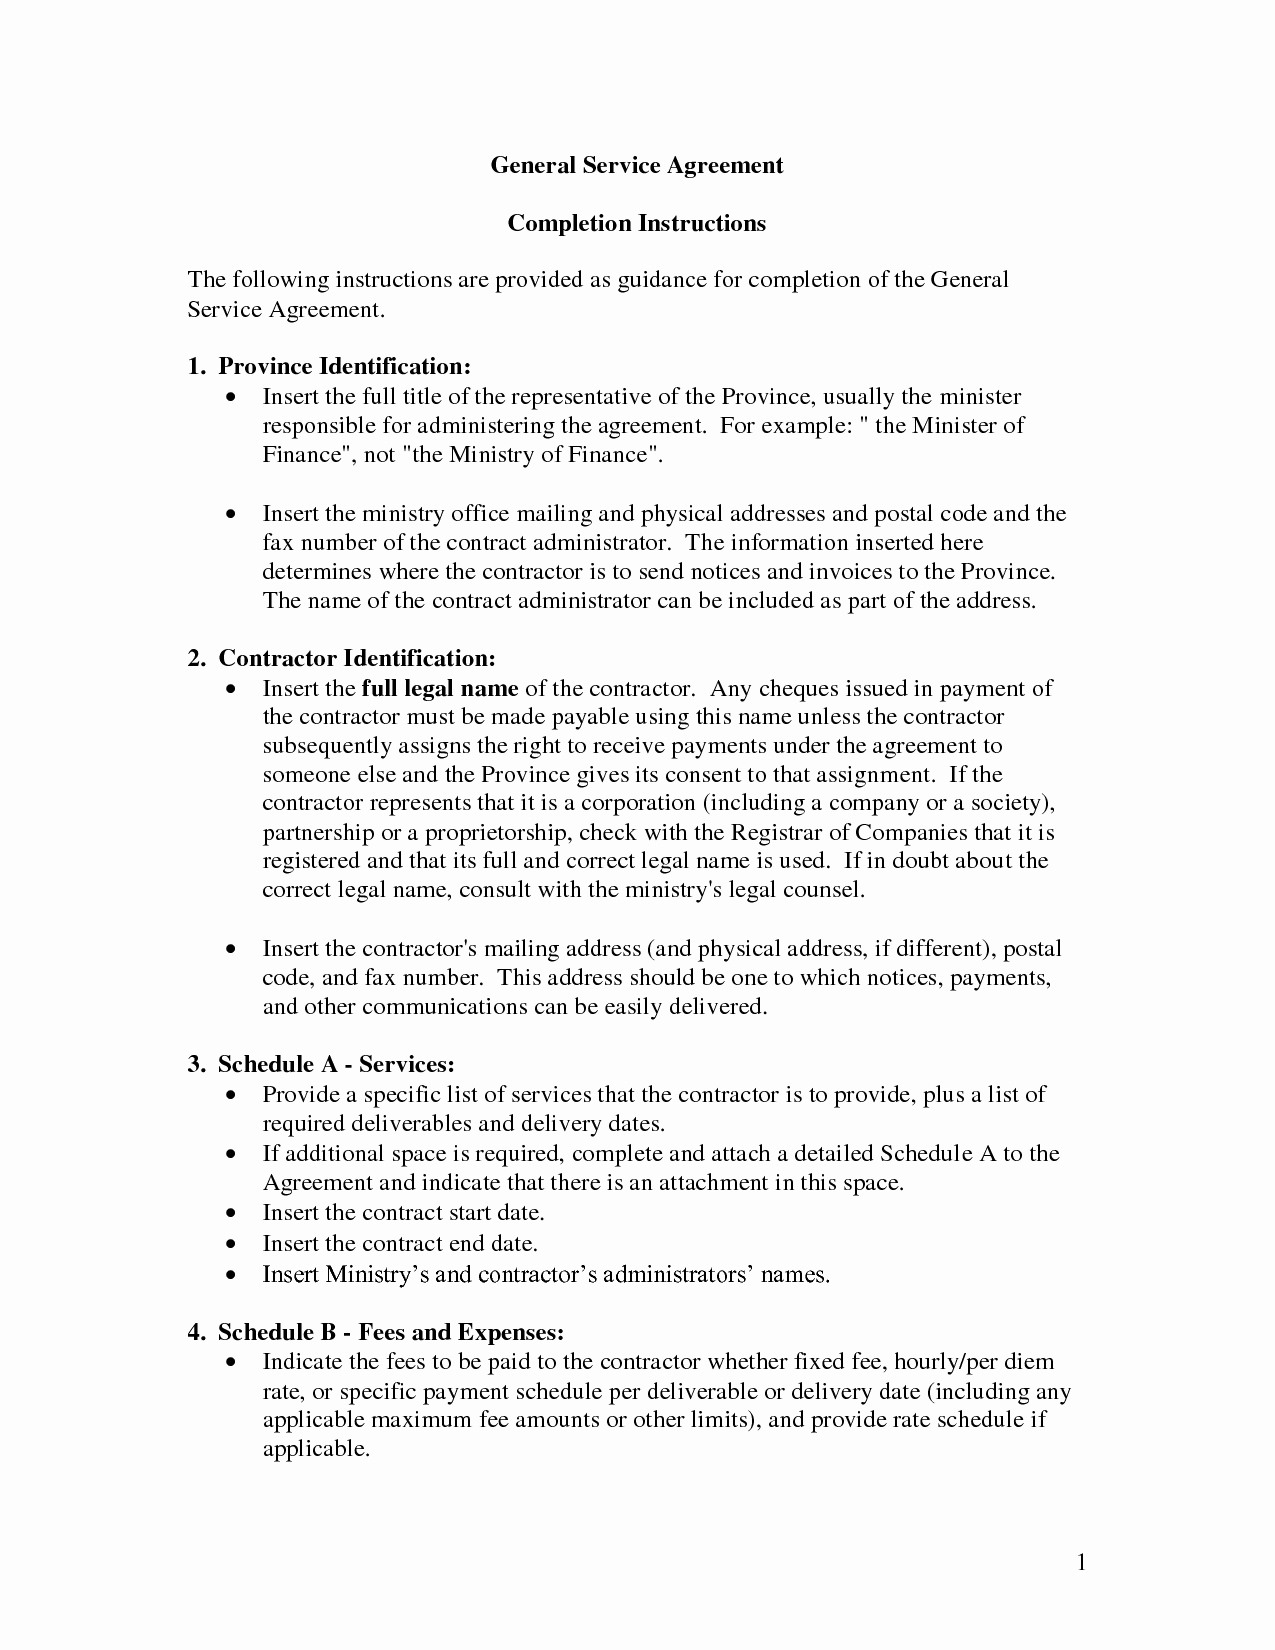 Shared Services Agreement Template Beautiful General Service Agreement Template by Banter General